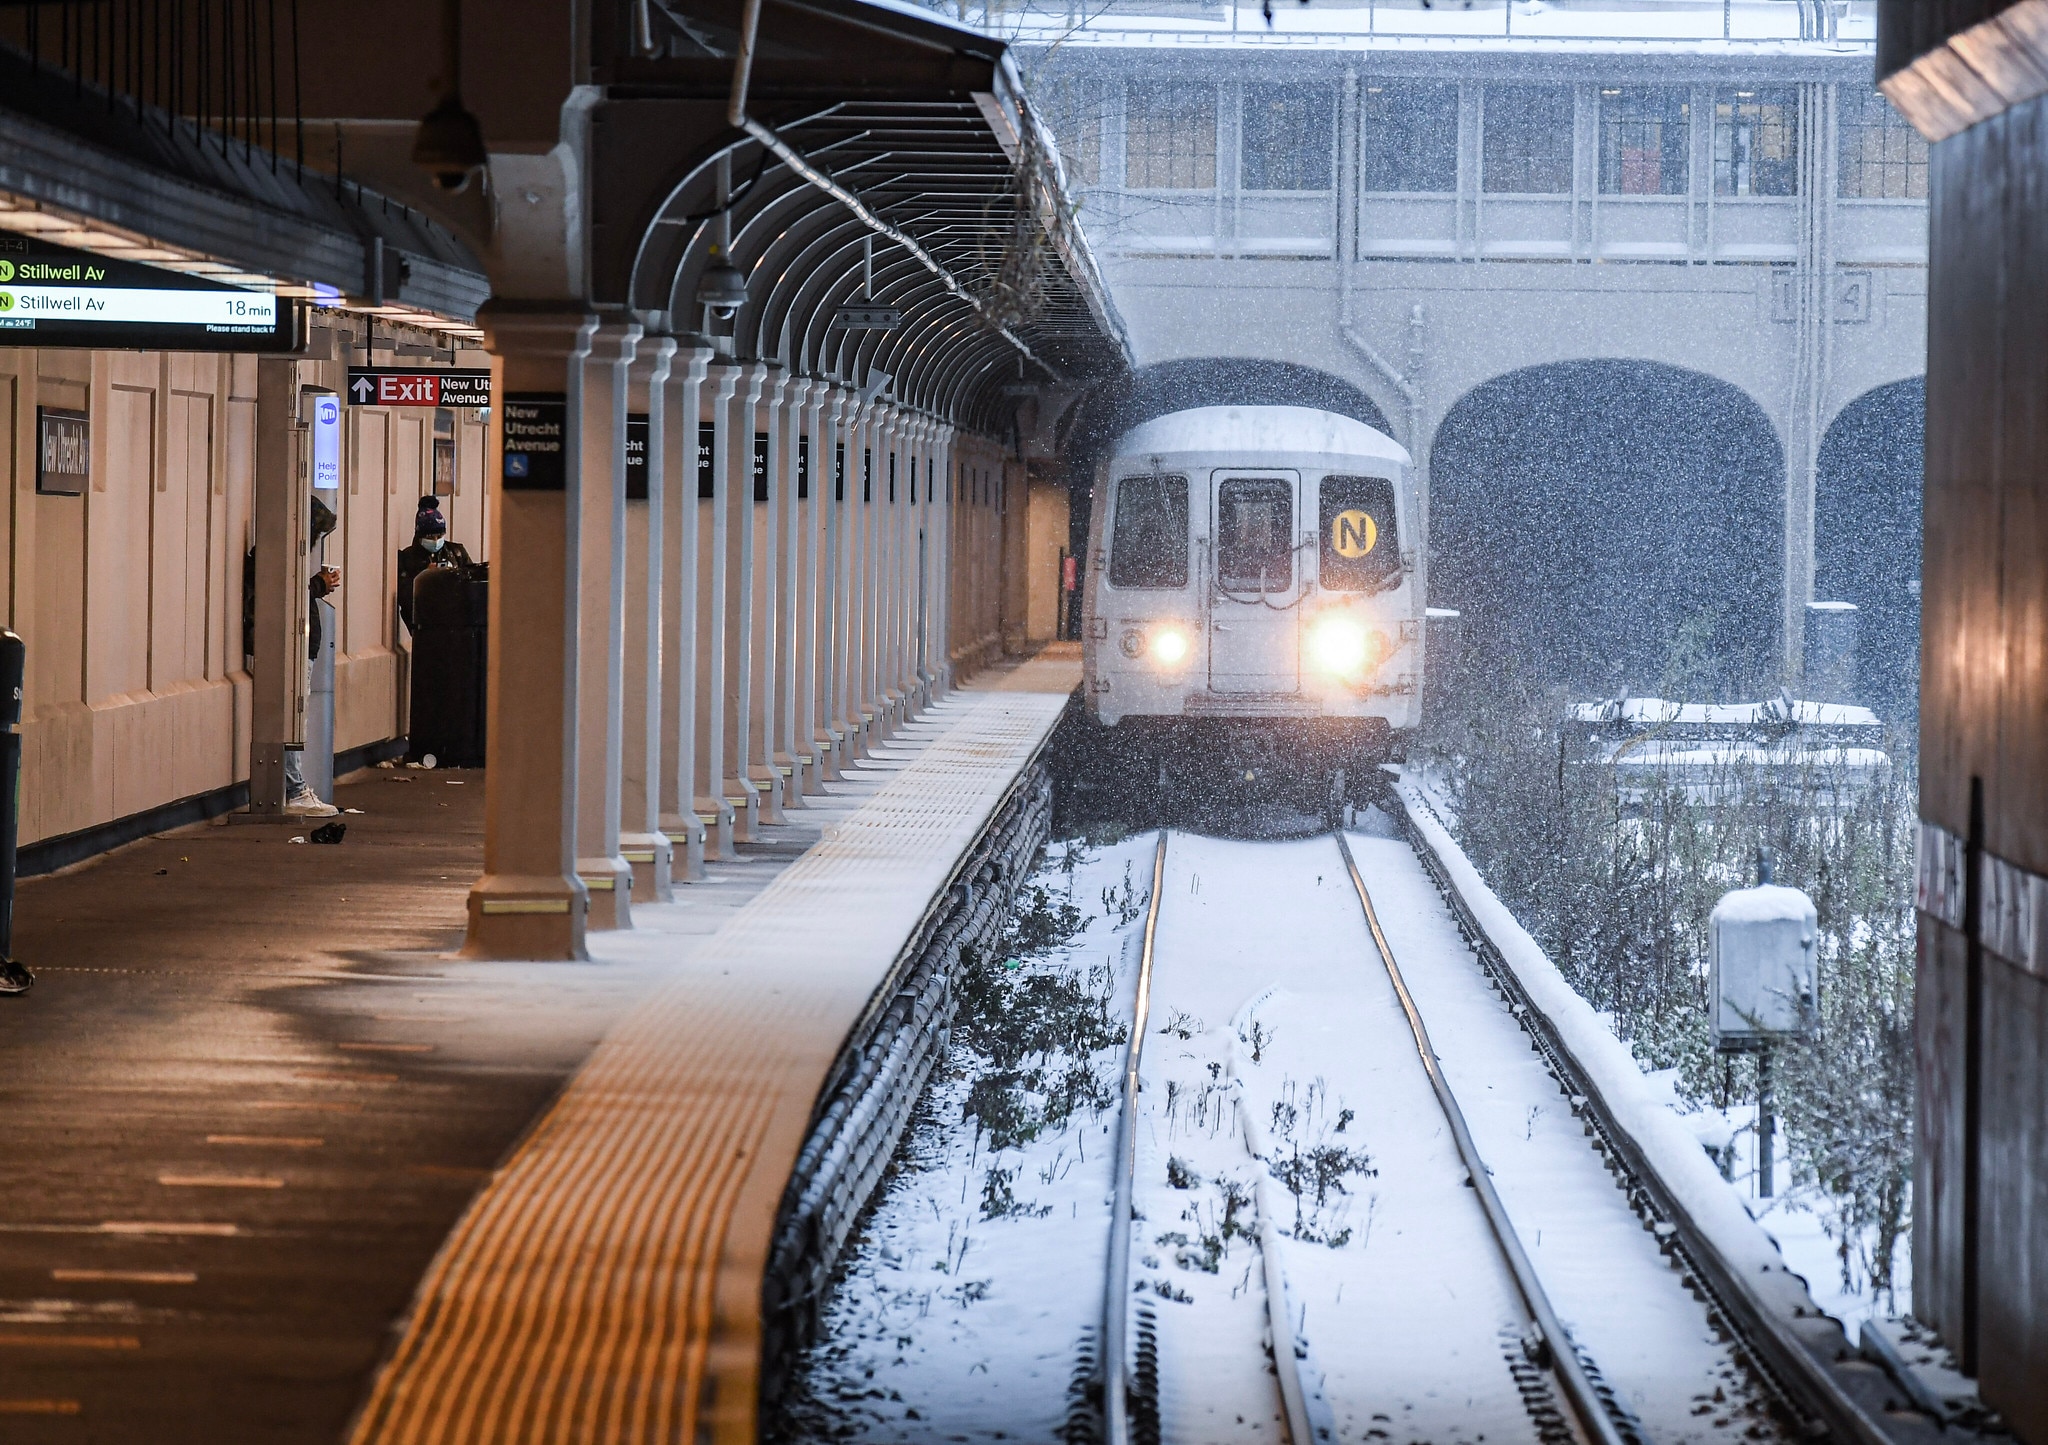 MTA Services Operating Near Normally After Winter Storm